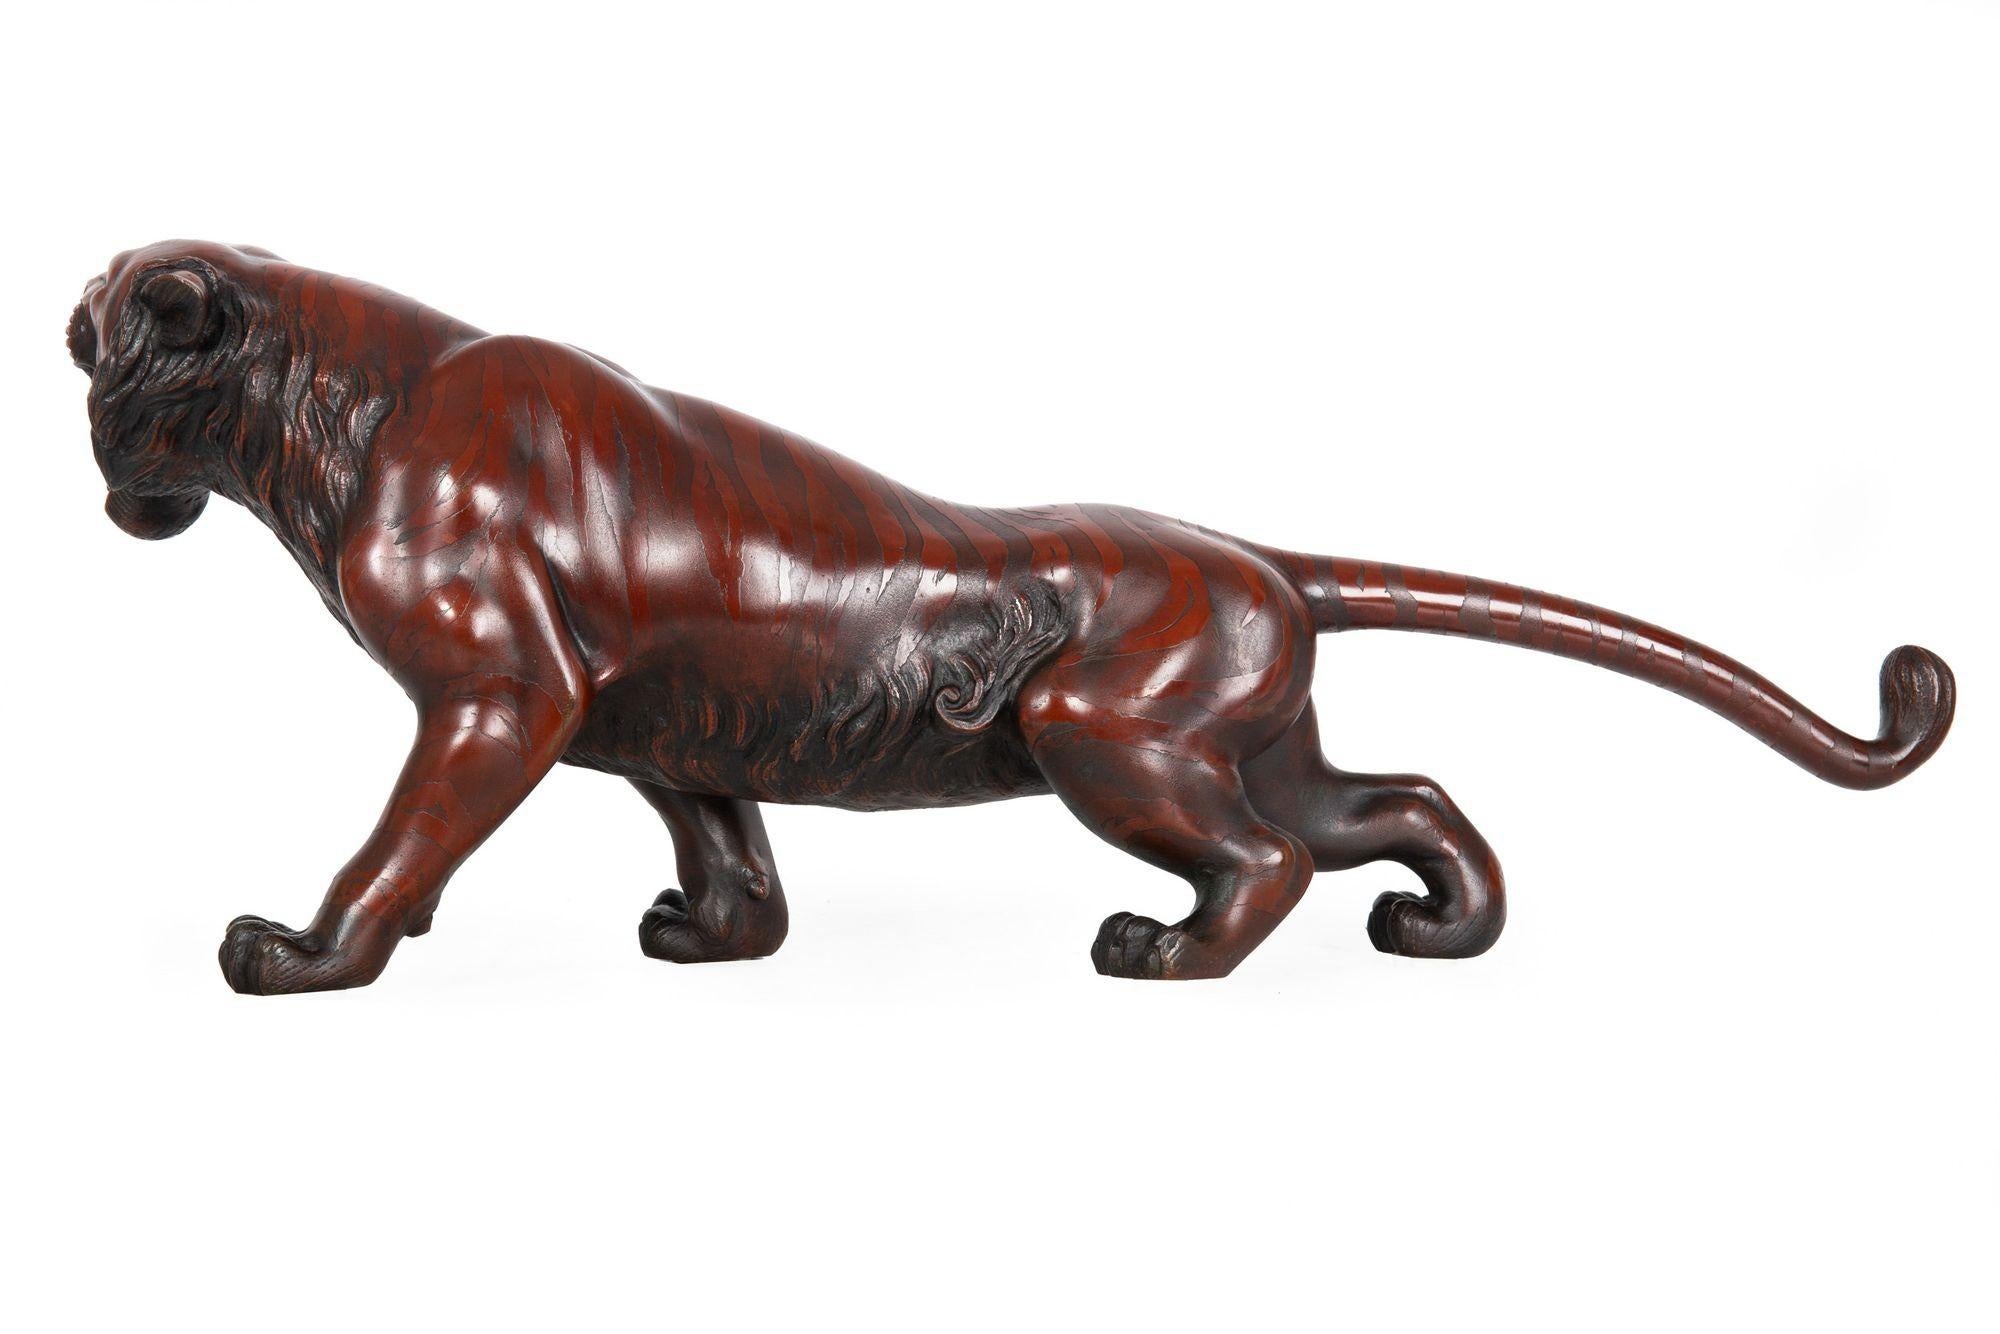 Japanese Meiji Period Bronze Okimono Sculpture of a Roaring Tiger, 27” wide In Good Condition For Sale In Shippensburg, PA